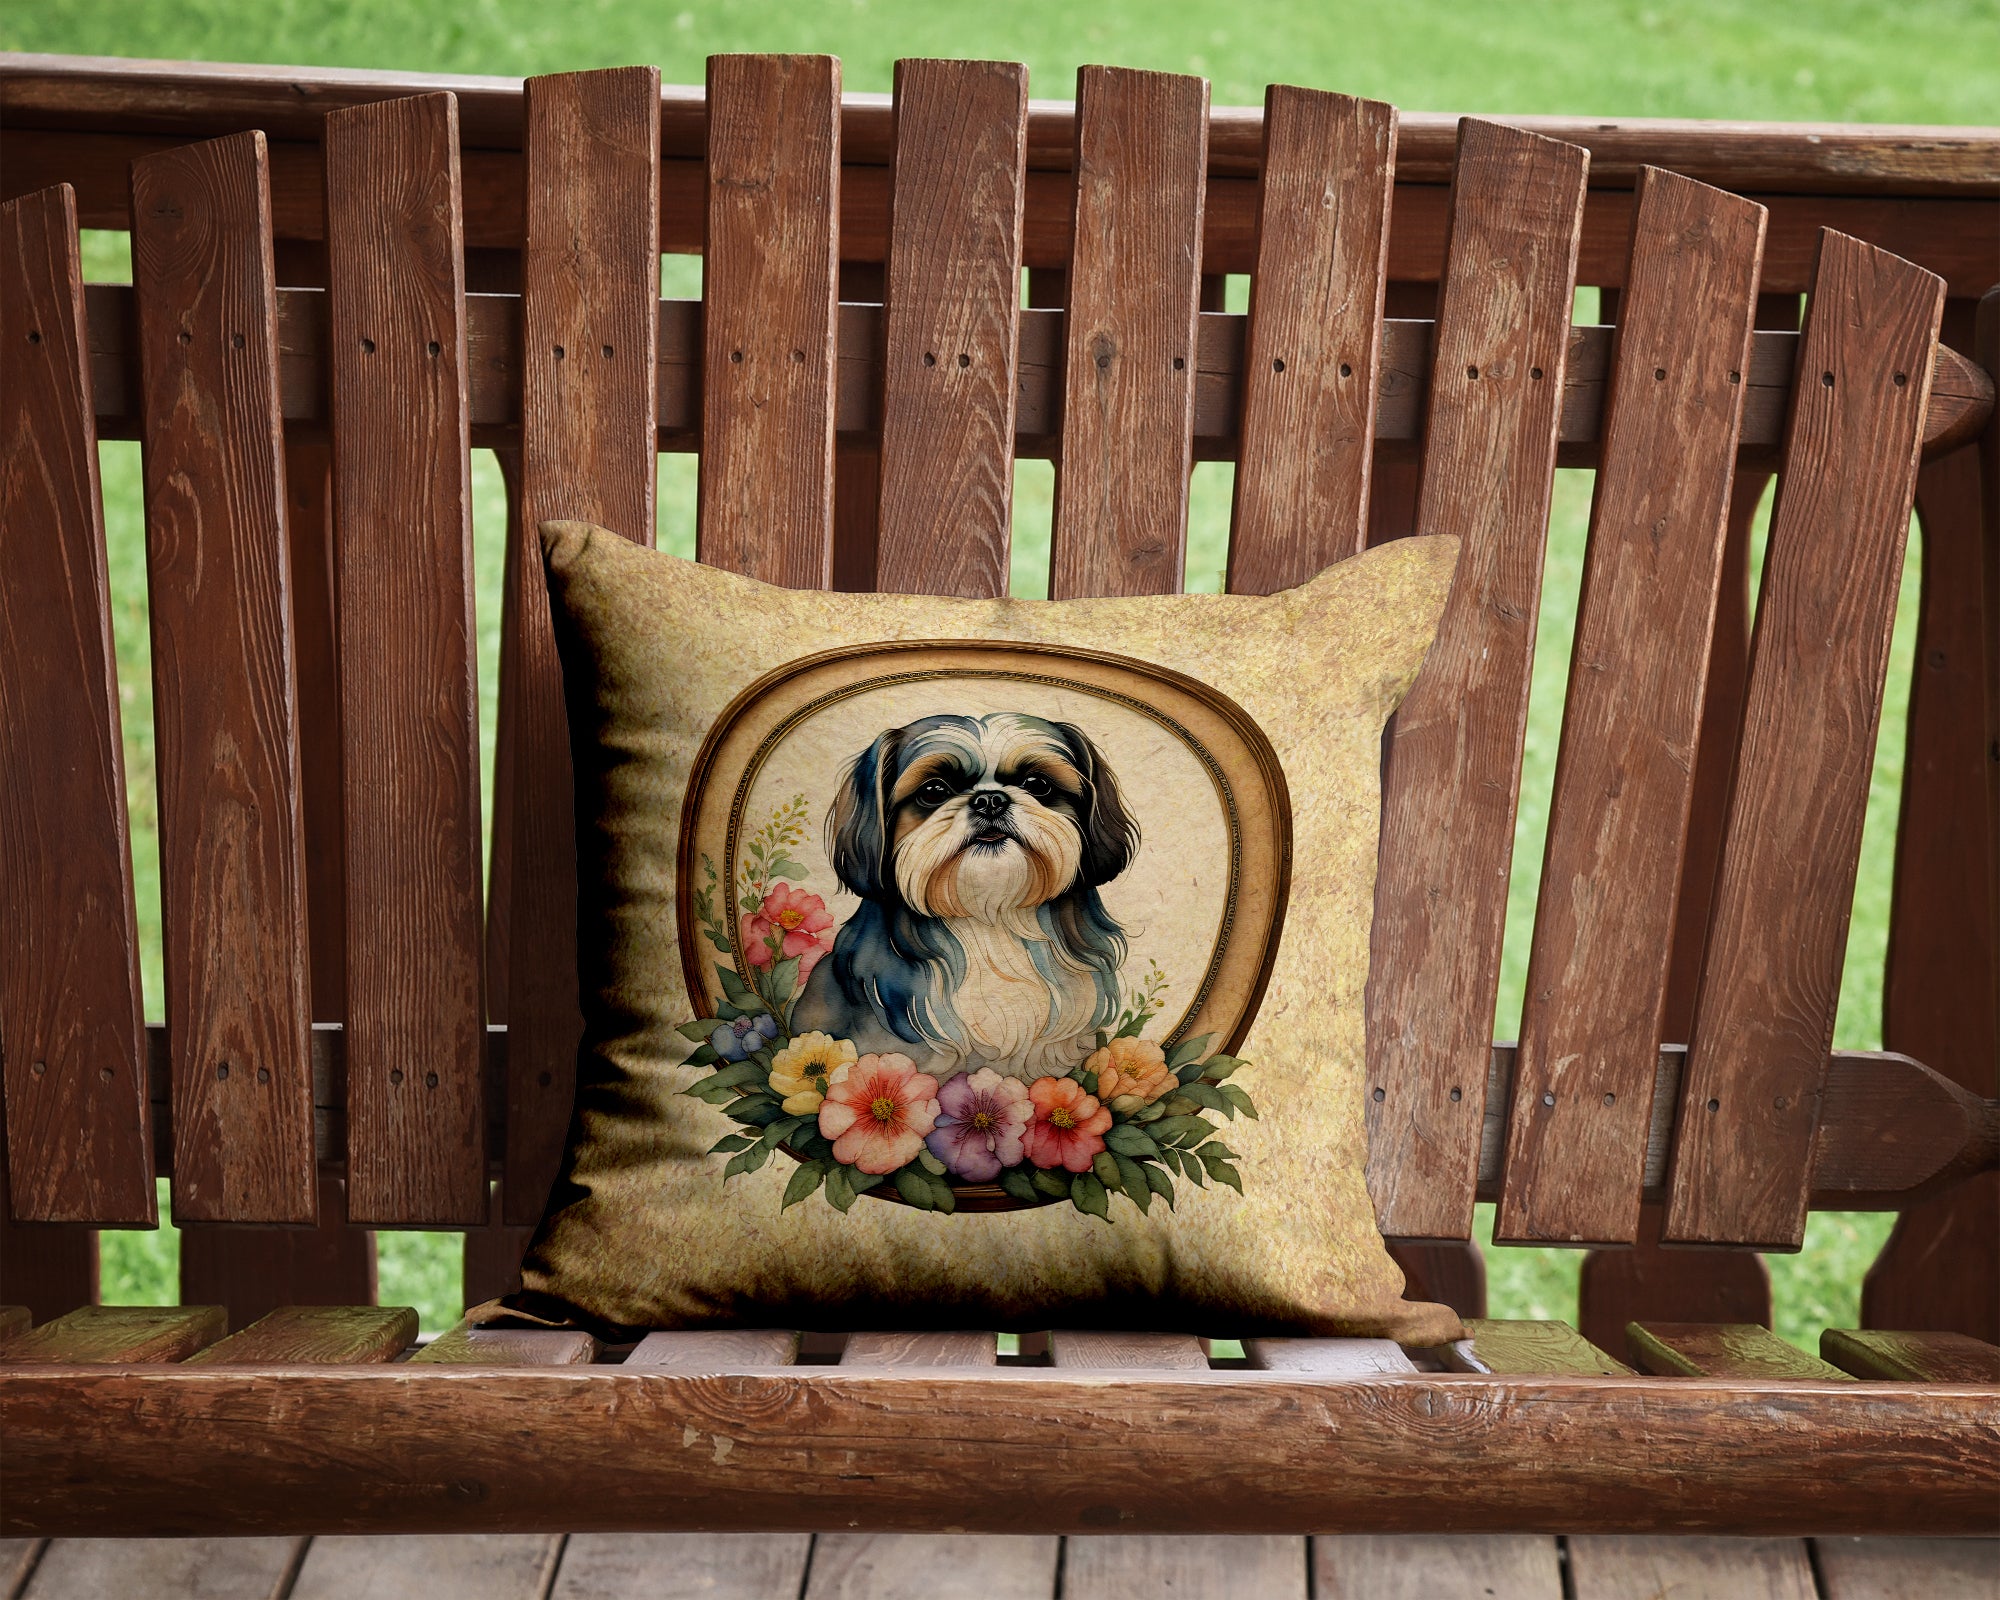 Buy this Shih Tzu and Flowers Fabric Decorative Pillow